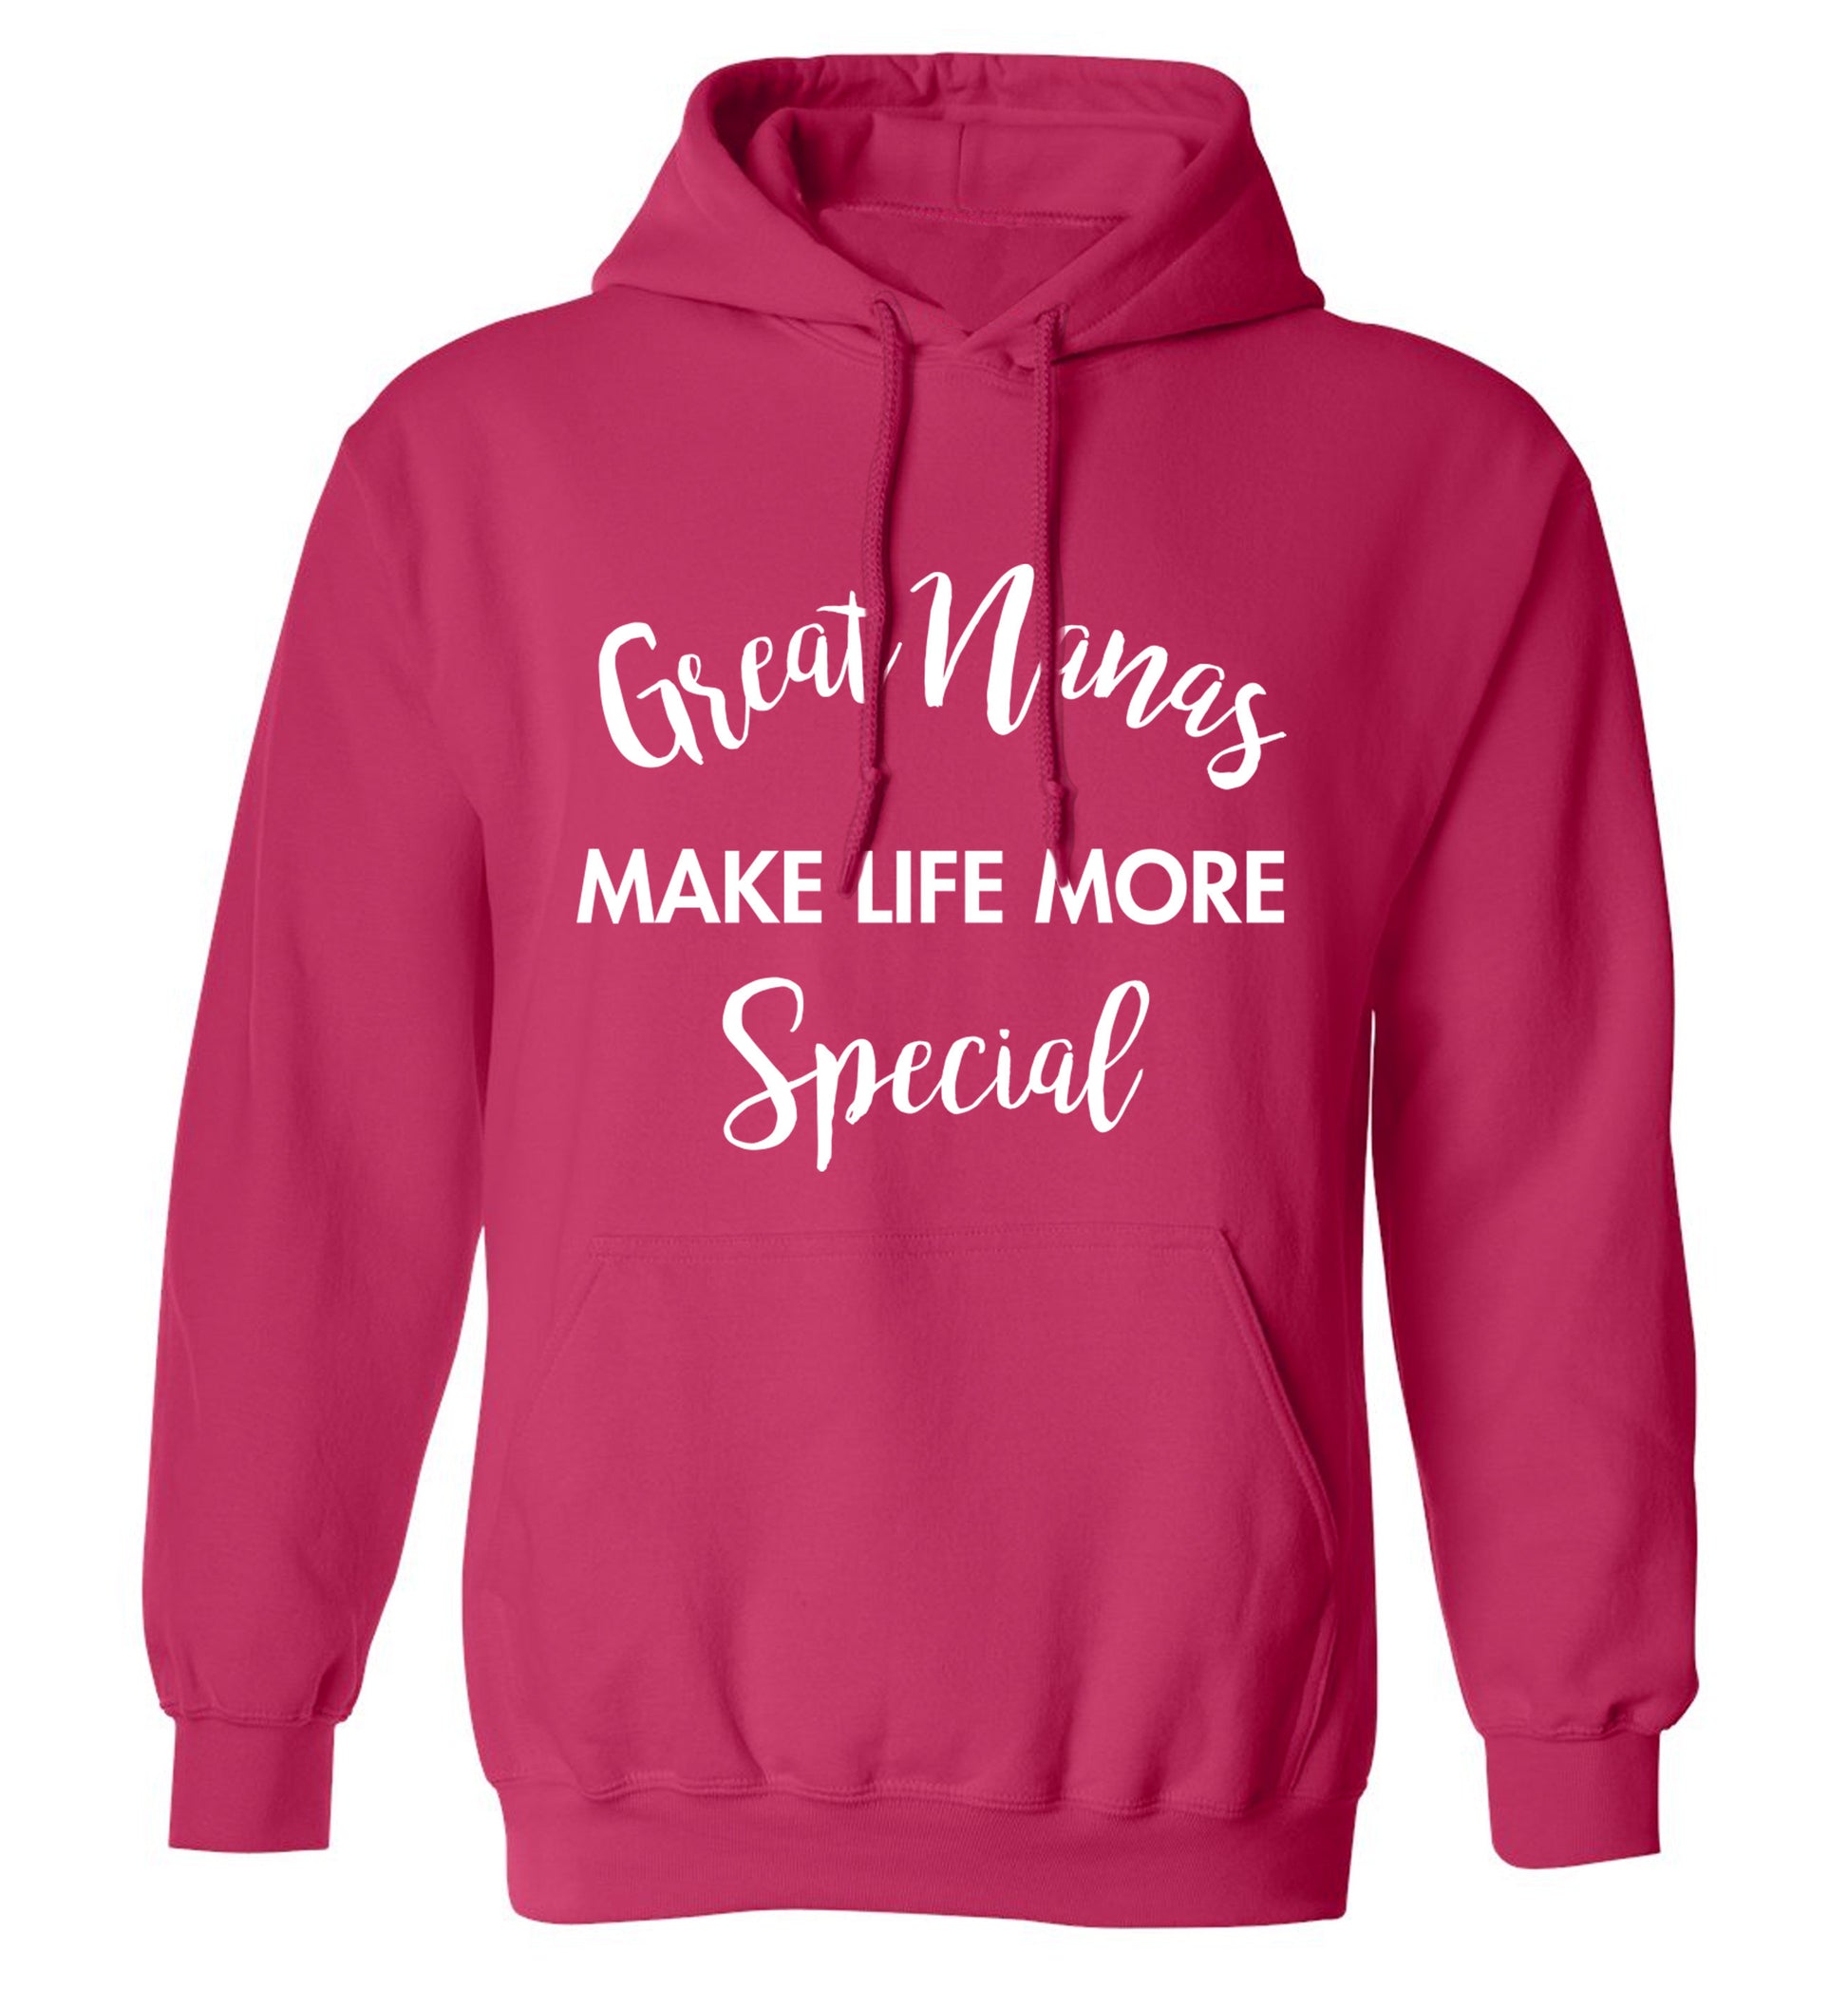 Great nanas make life more special adults unisex pink hoodie 2XL